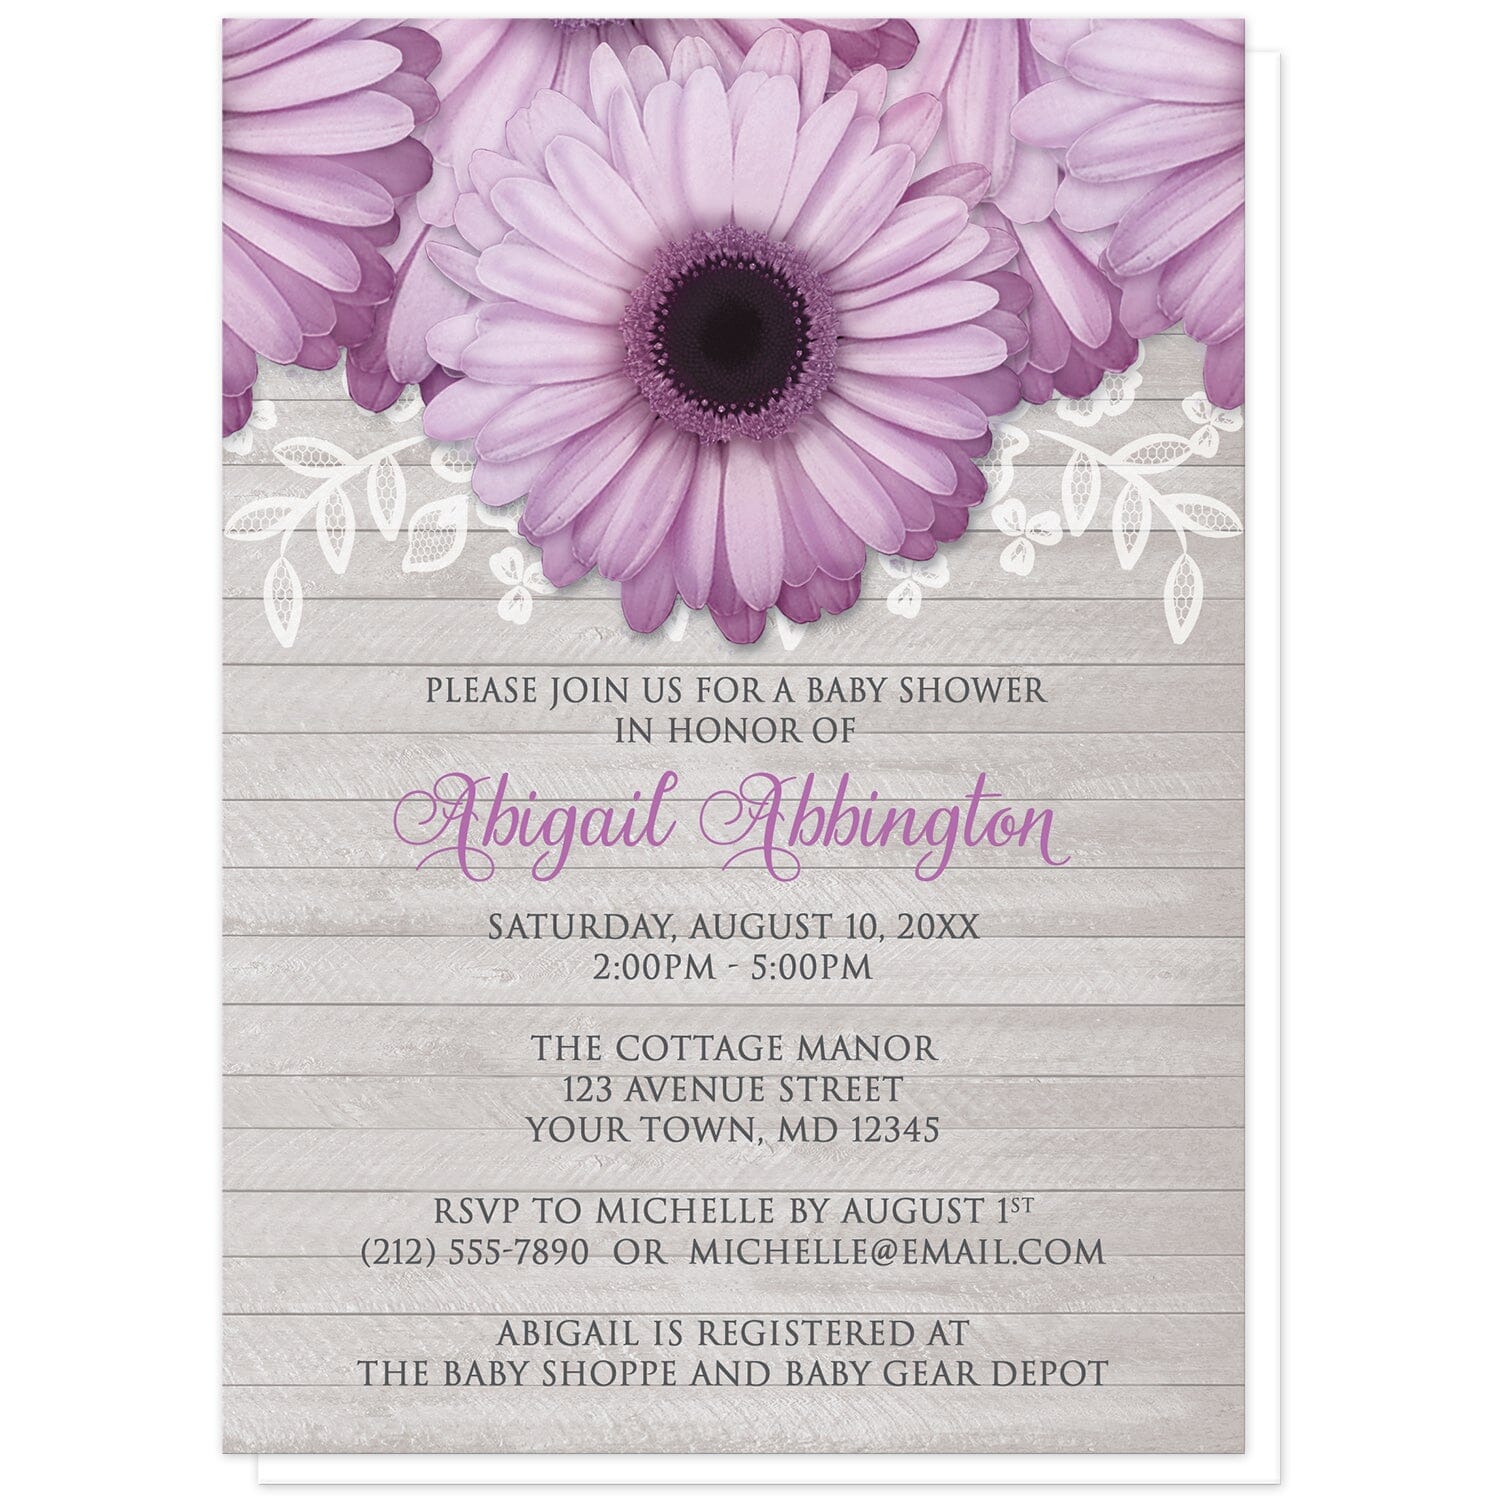 Rustic Purple Daisy Gray Wood Baby Shower Invitations at Artistically Invited. Rustic purple daisy gray wood baby shower invitations designed with large and lovely purple daisy flowers with a white lace overlay along the top over a light gray wood background illustration. Your personalized baby shower celebration details are custom printed in purple and dark gray over the wood background design below the pretty purple daisies.